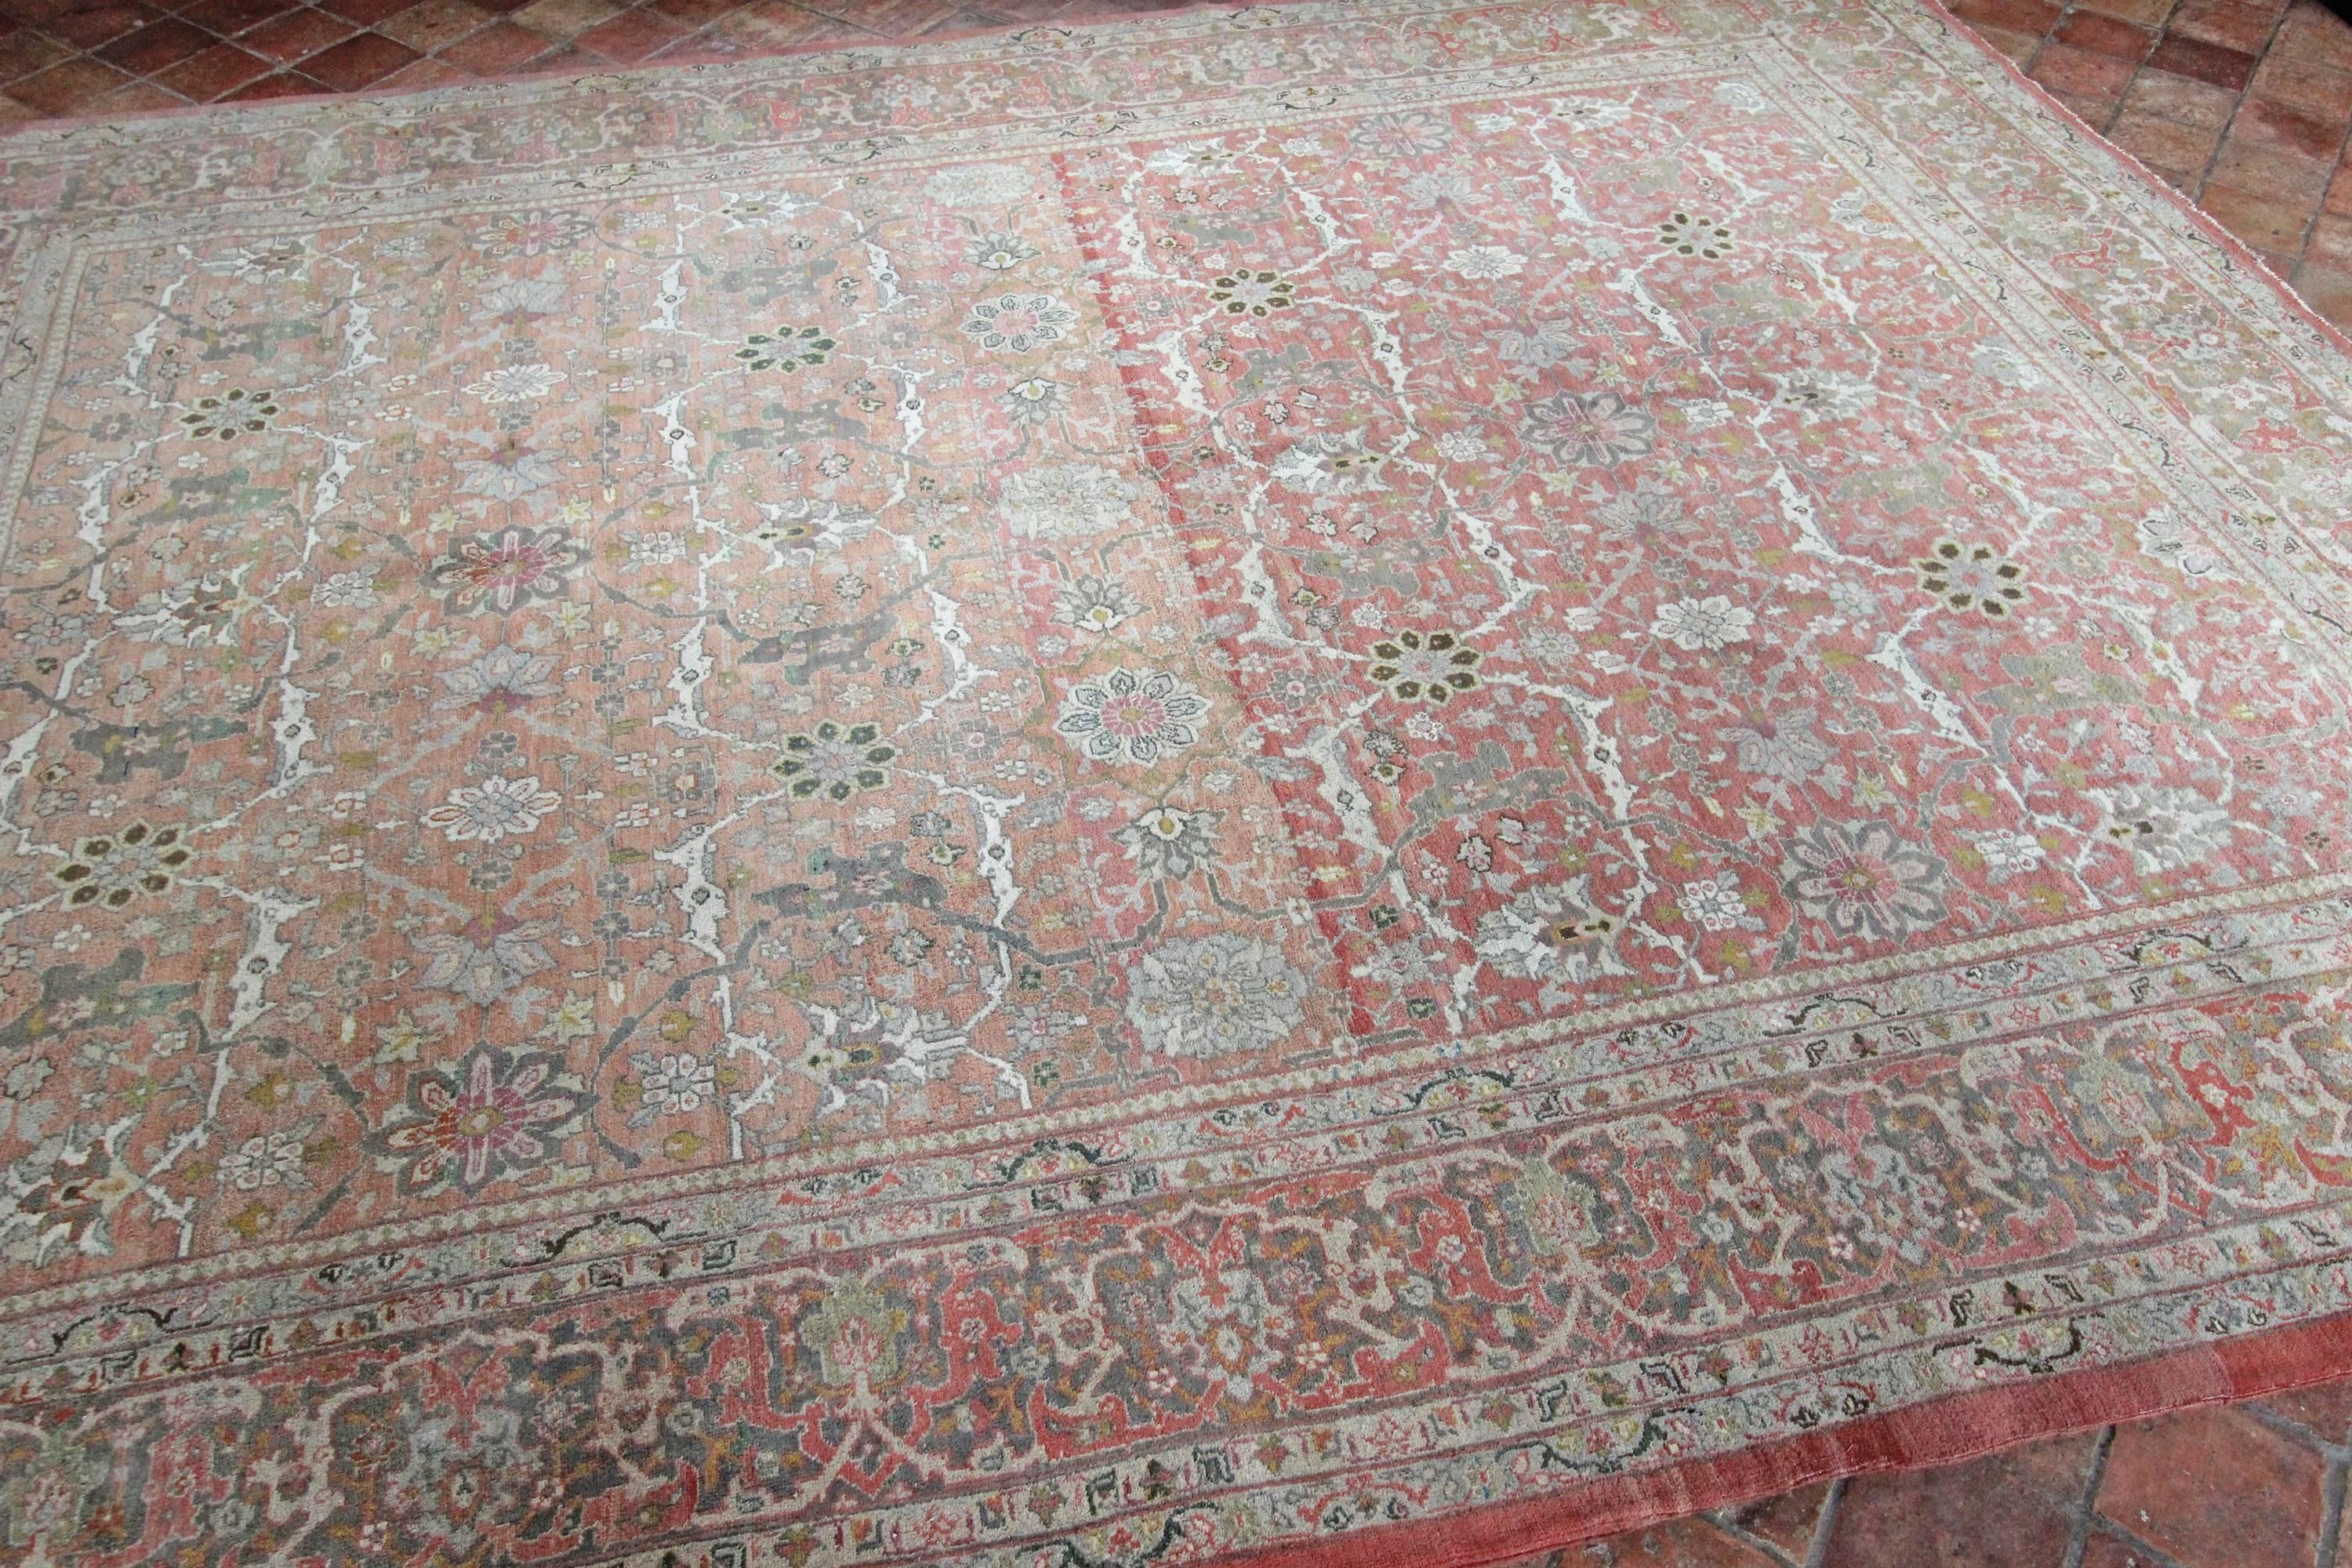 Beautiful antique Sivas carpet woven in central Anatolia, wonderful dye change throughout the carpet where different dyes have been used and faded over the years.  With a cotton foundation it allows for a finer weave compared to other Turkish